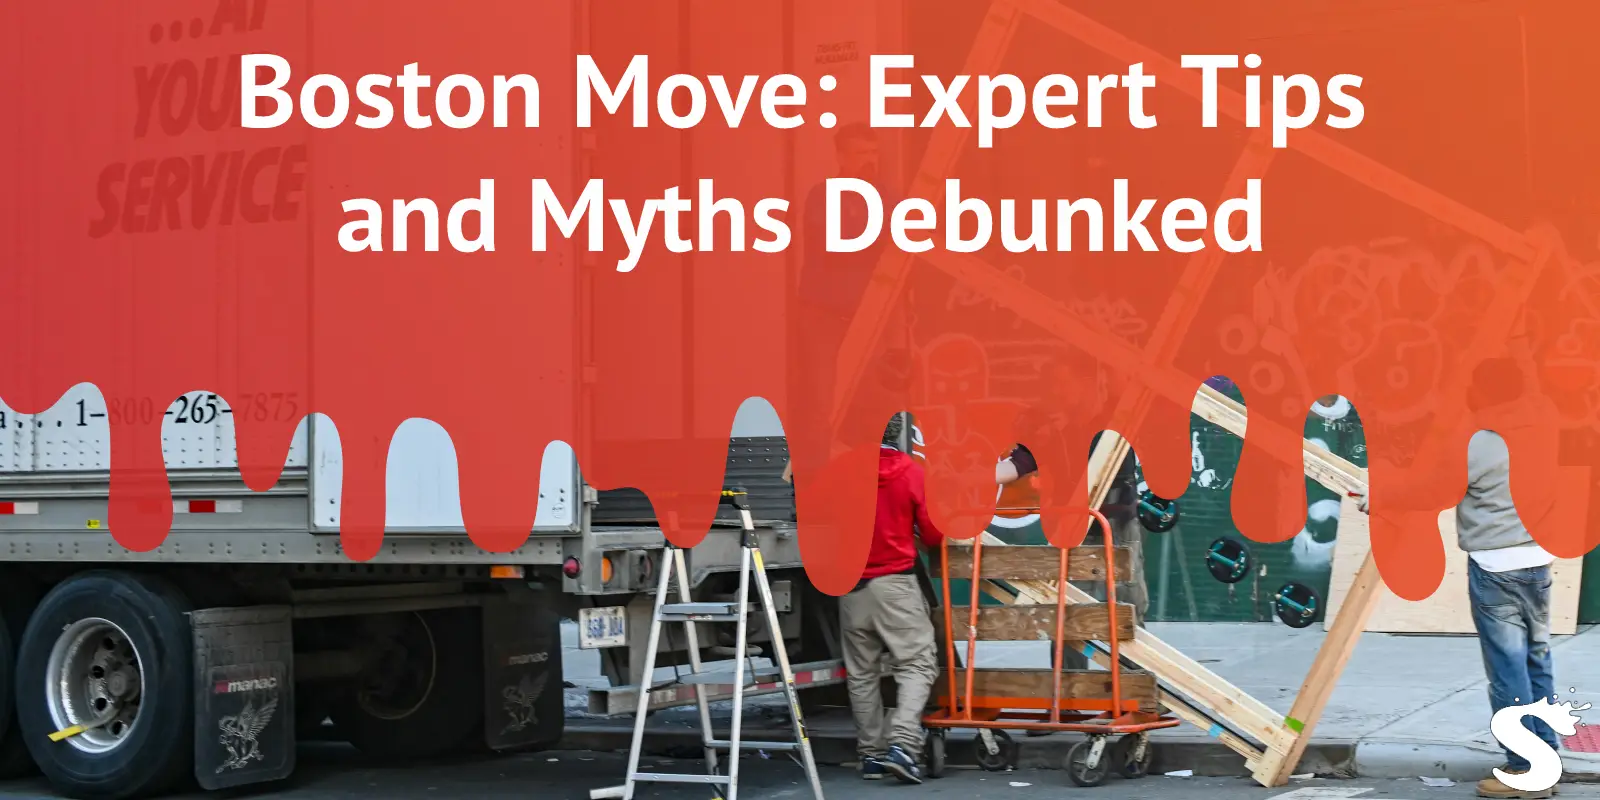 Boston Move: Expert Tips and Myths Debunked